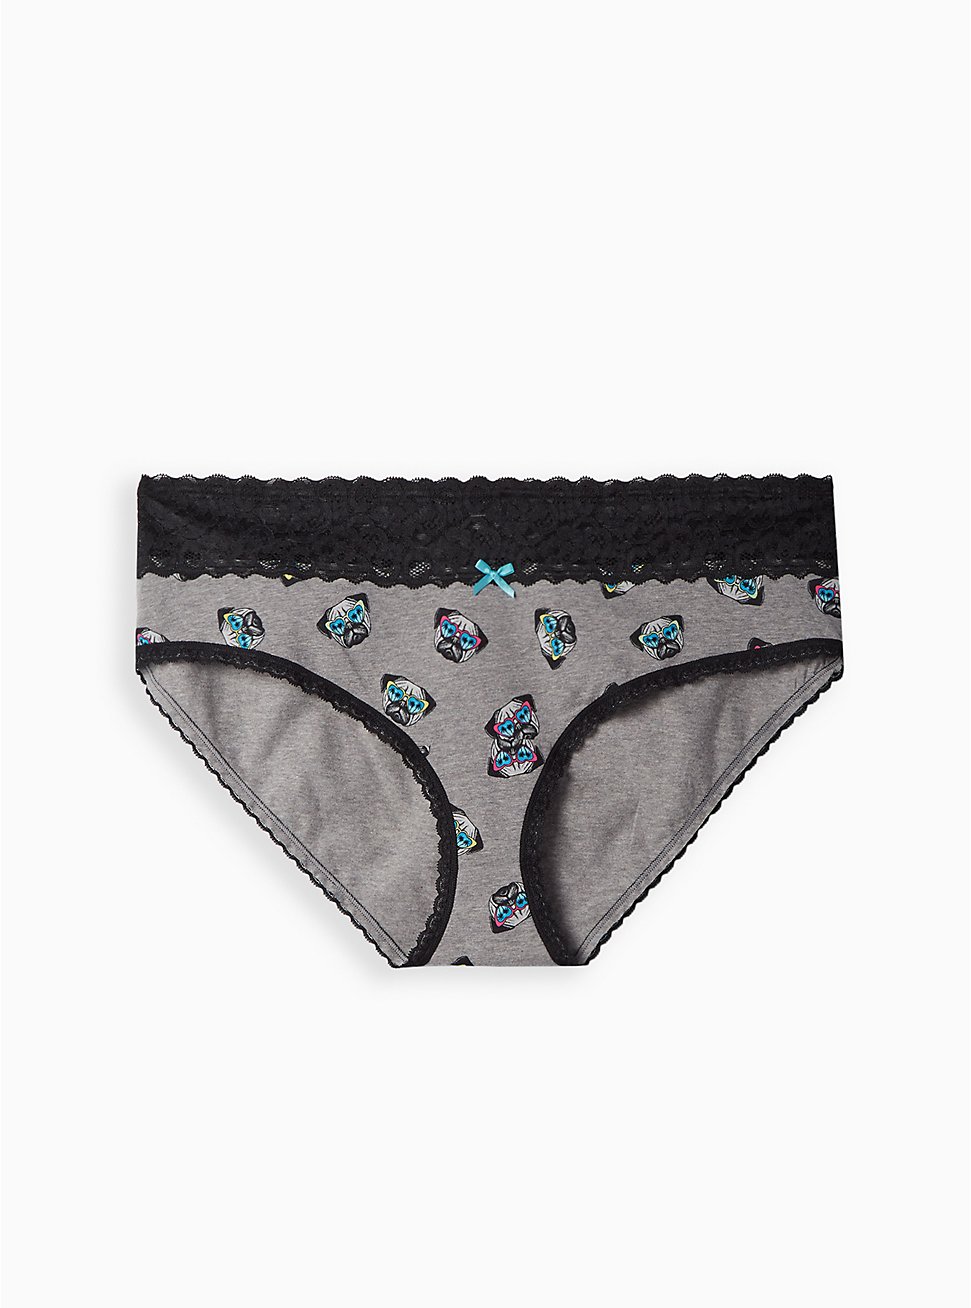 Wide Lace Hipster Panty - Cotton Pugs Grey, PUG PARADISE GREY, hi-res